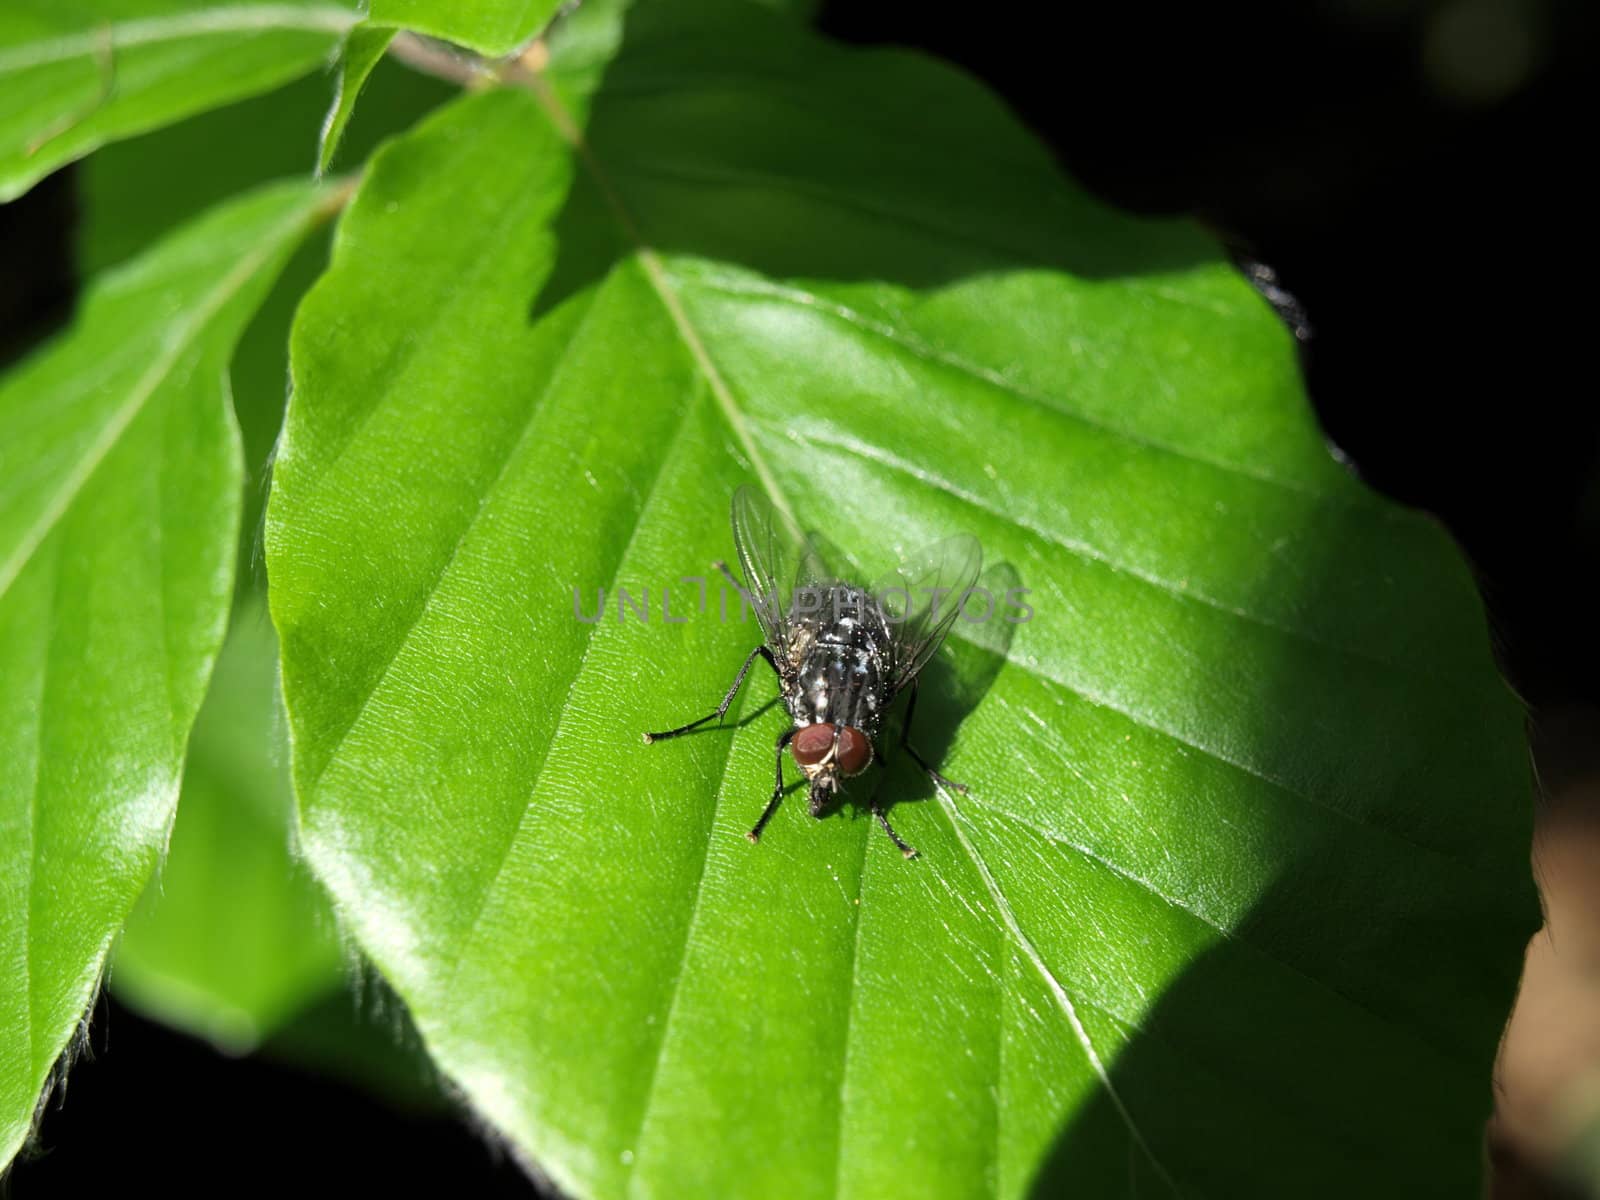 the fly on the leaf by renales